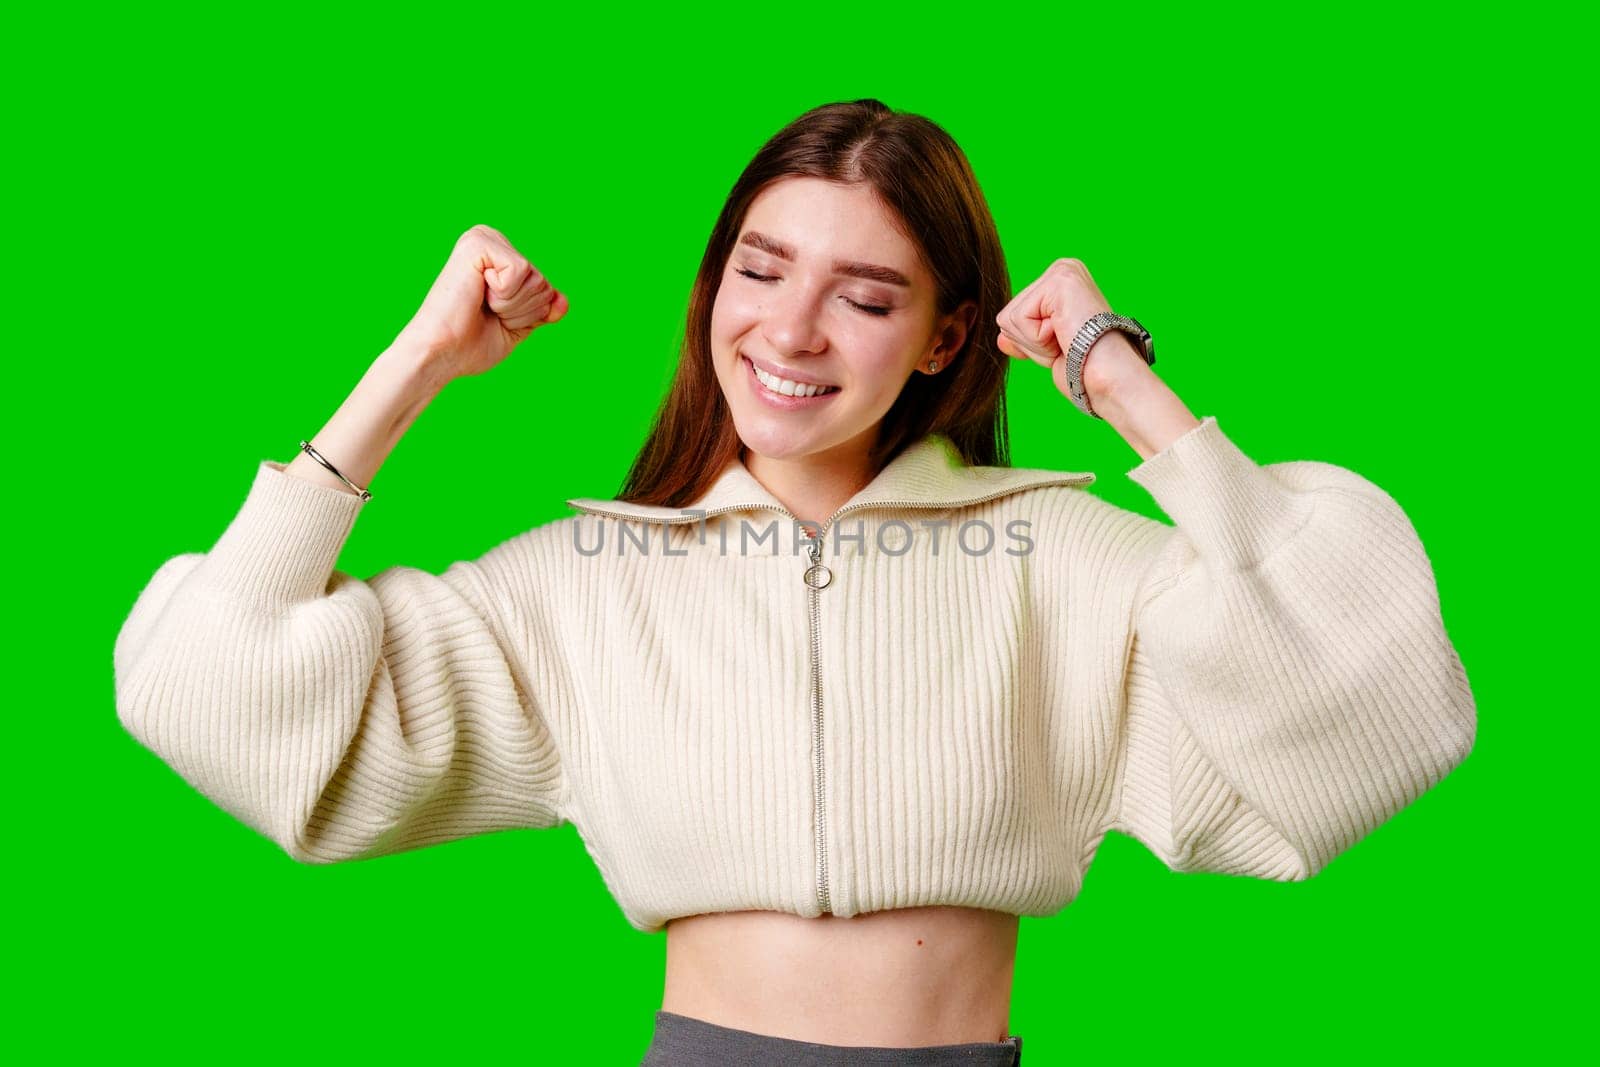 A woman wearing a white sweater is showcasing her strength by flexing her arm muscles. She appears confident and determined, highlighting her physical fitness and dedication to exercise.